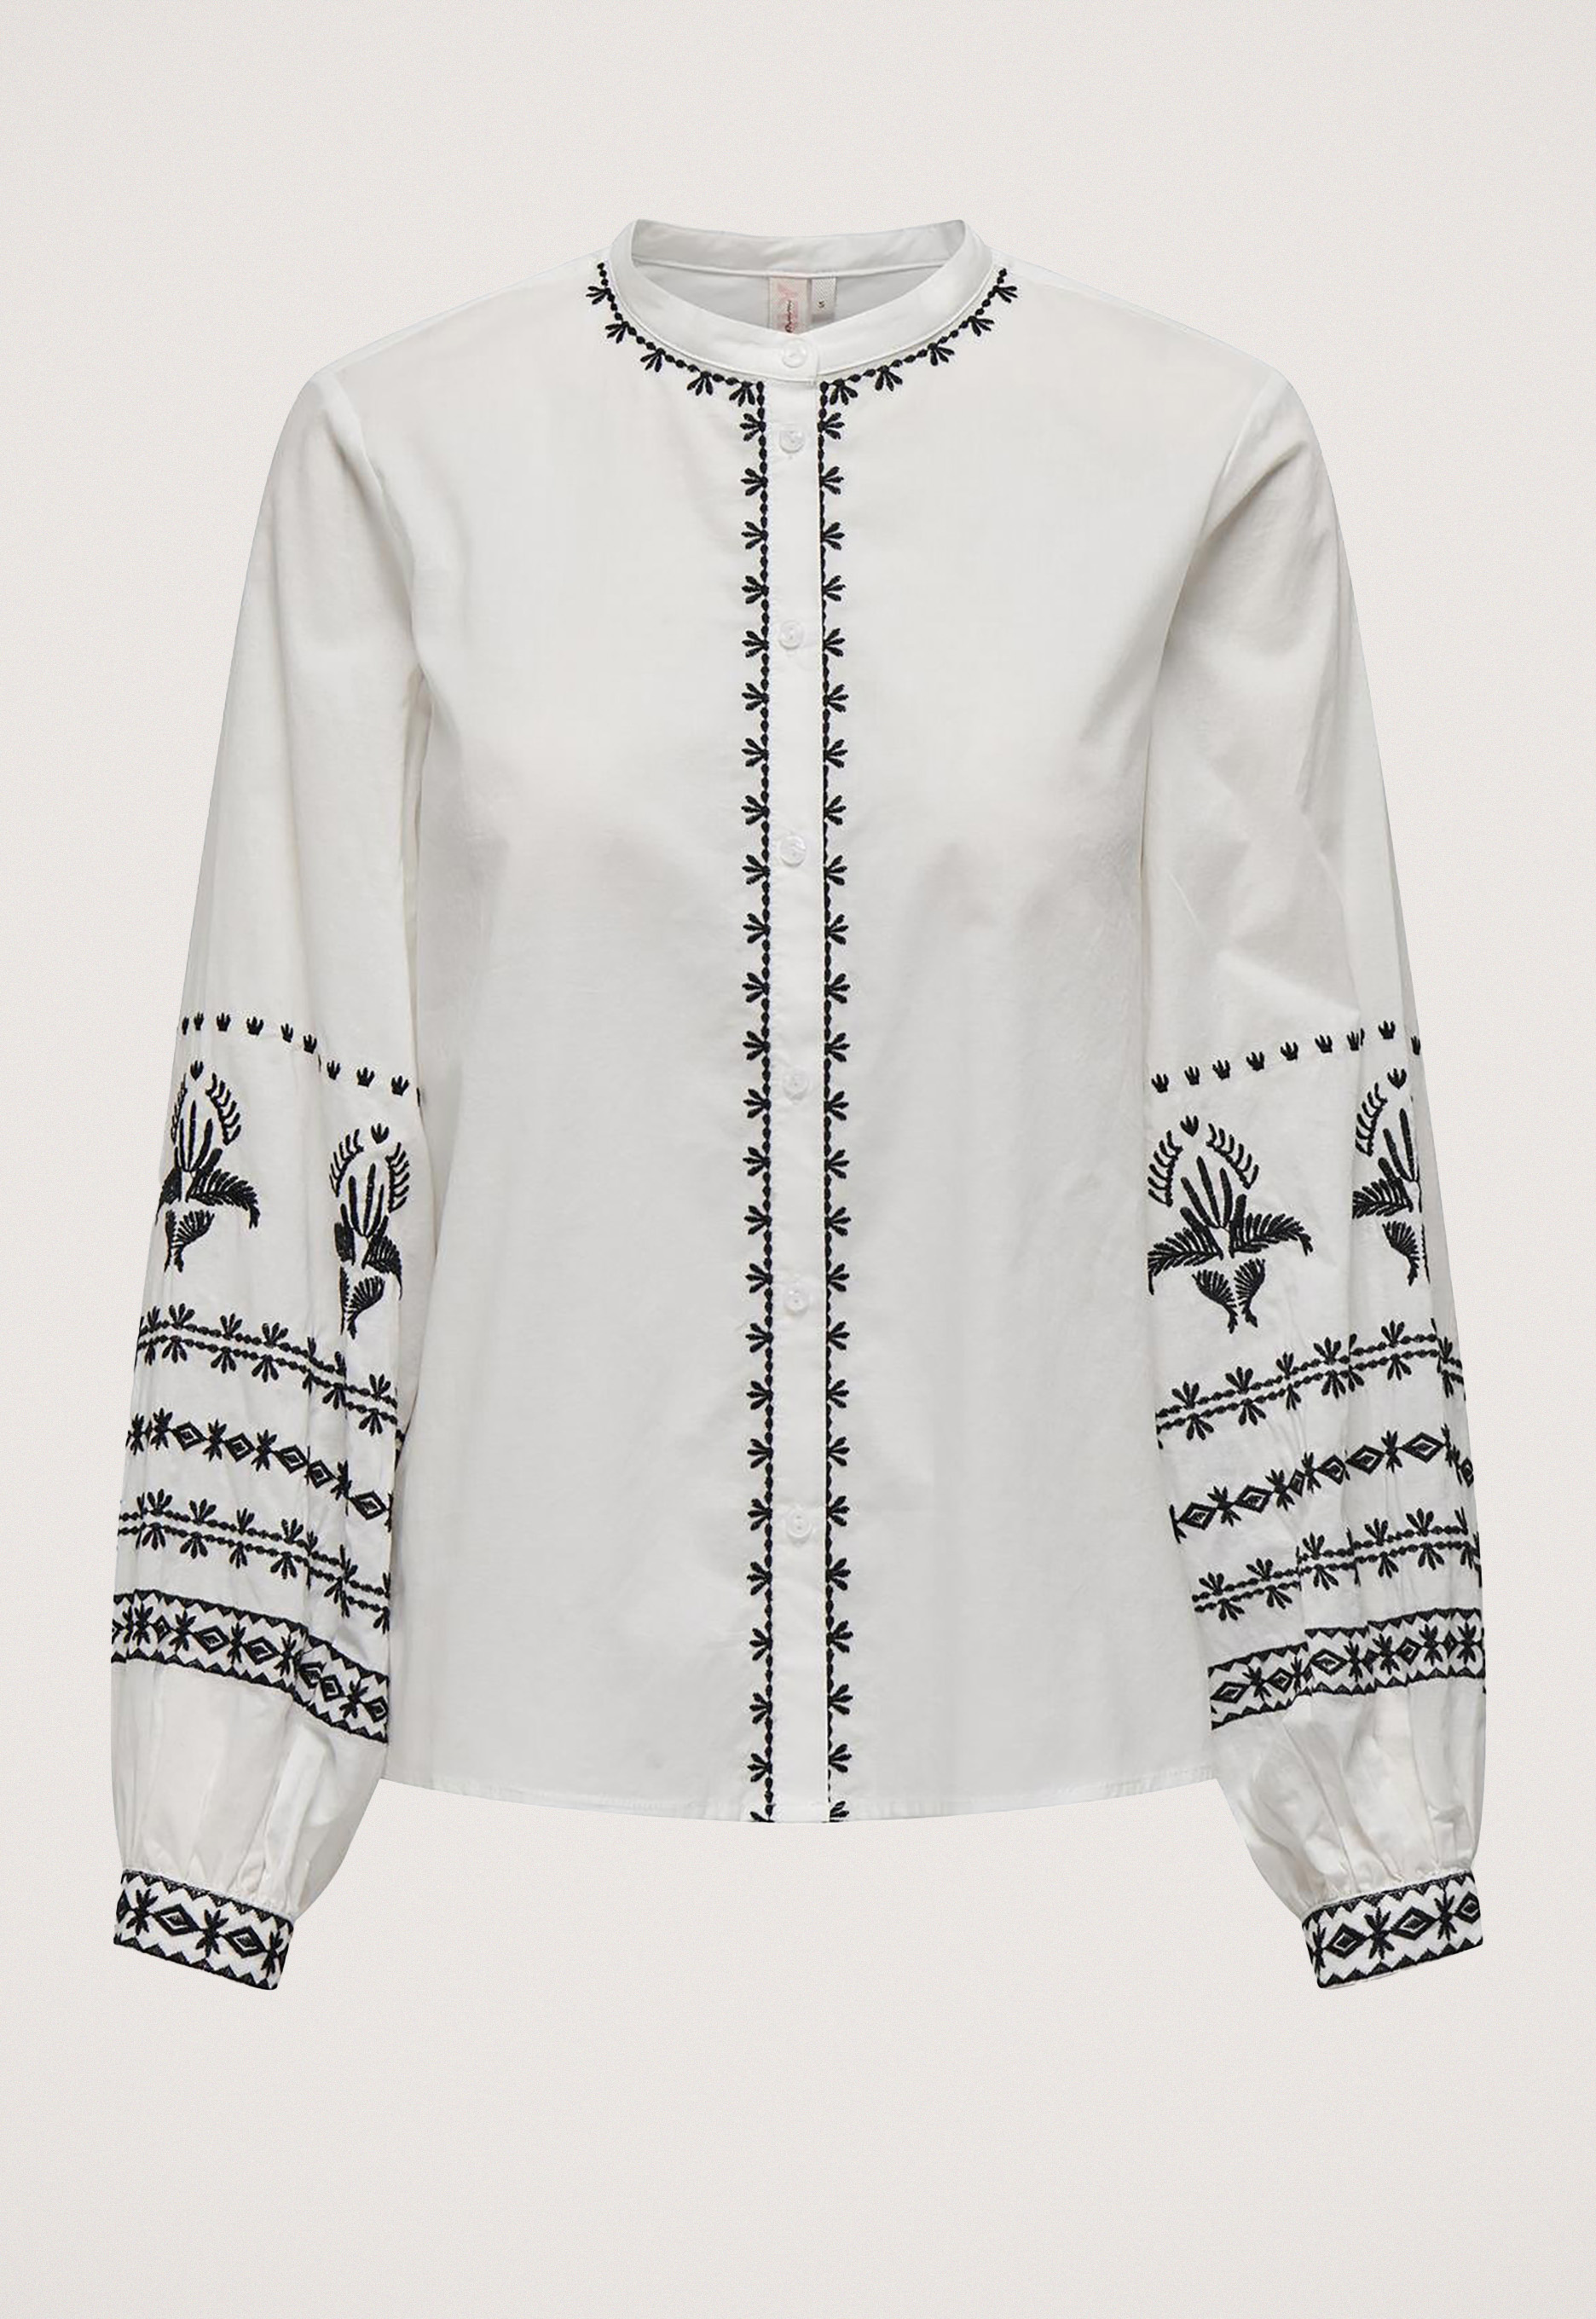 Only Audra Contrast Blouse